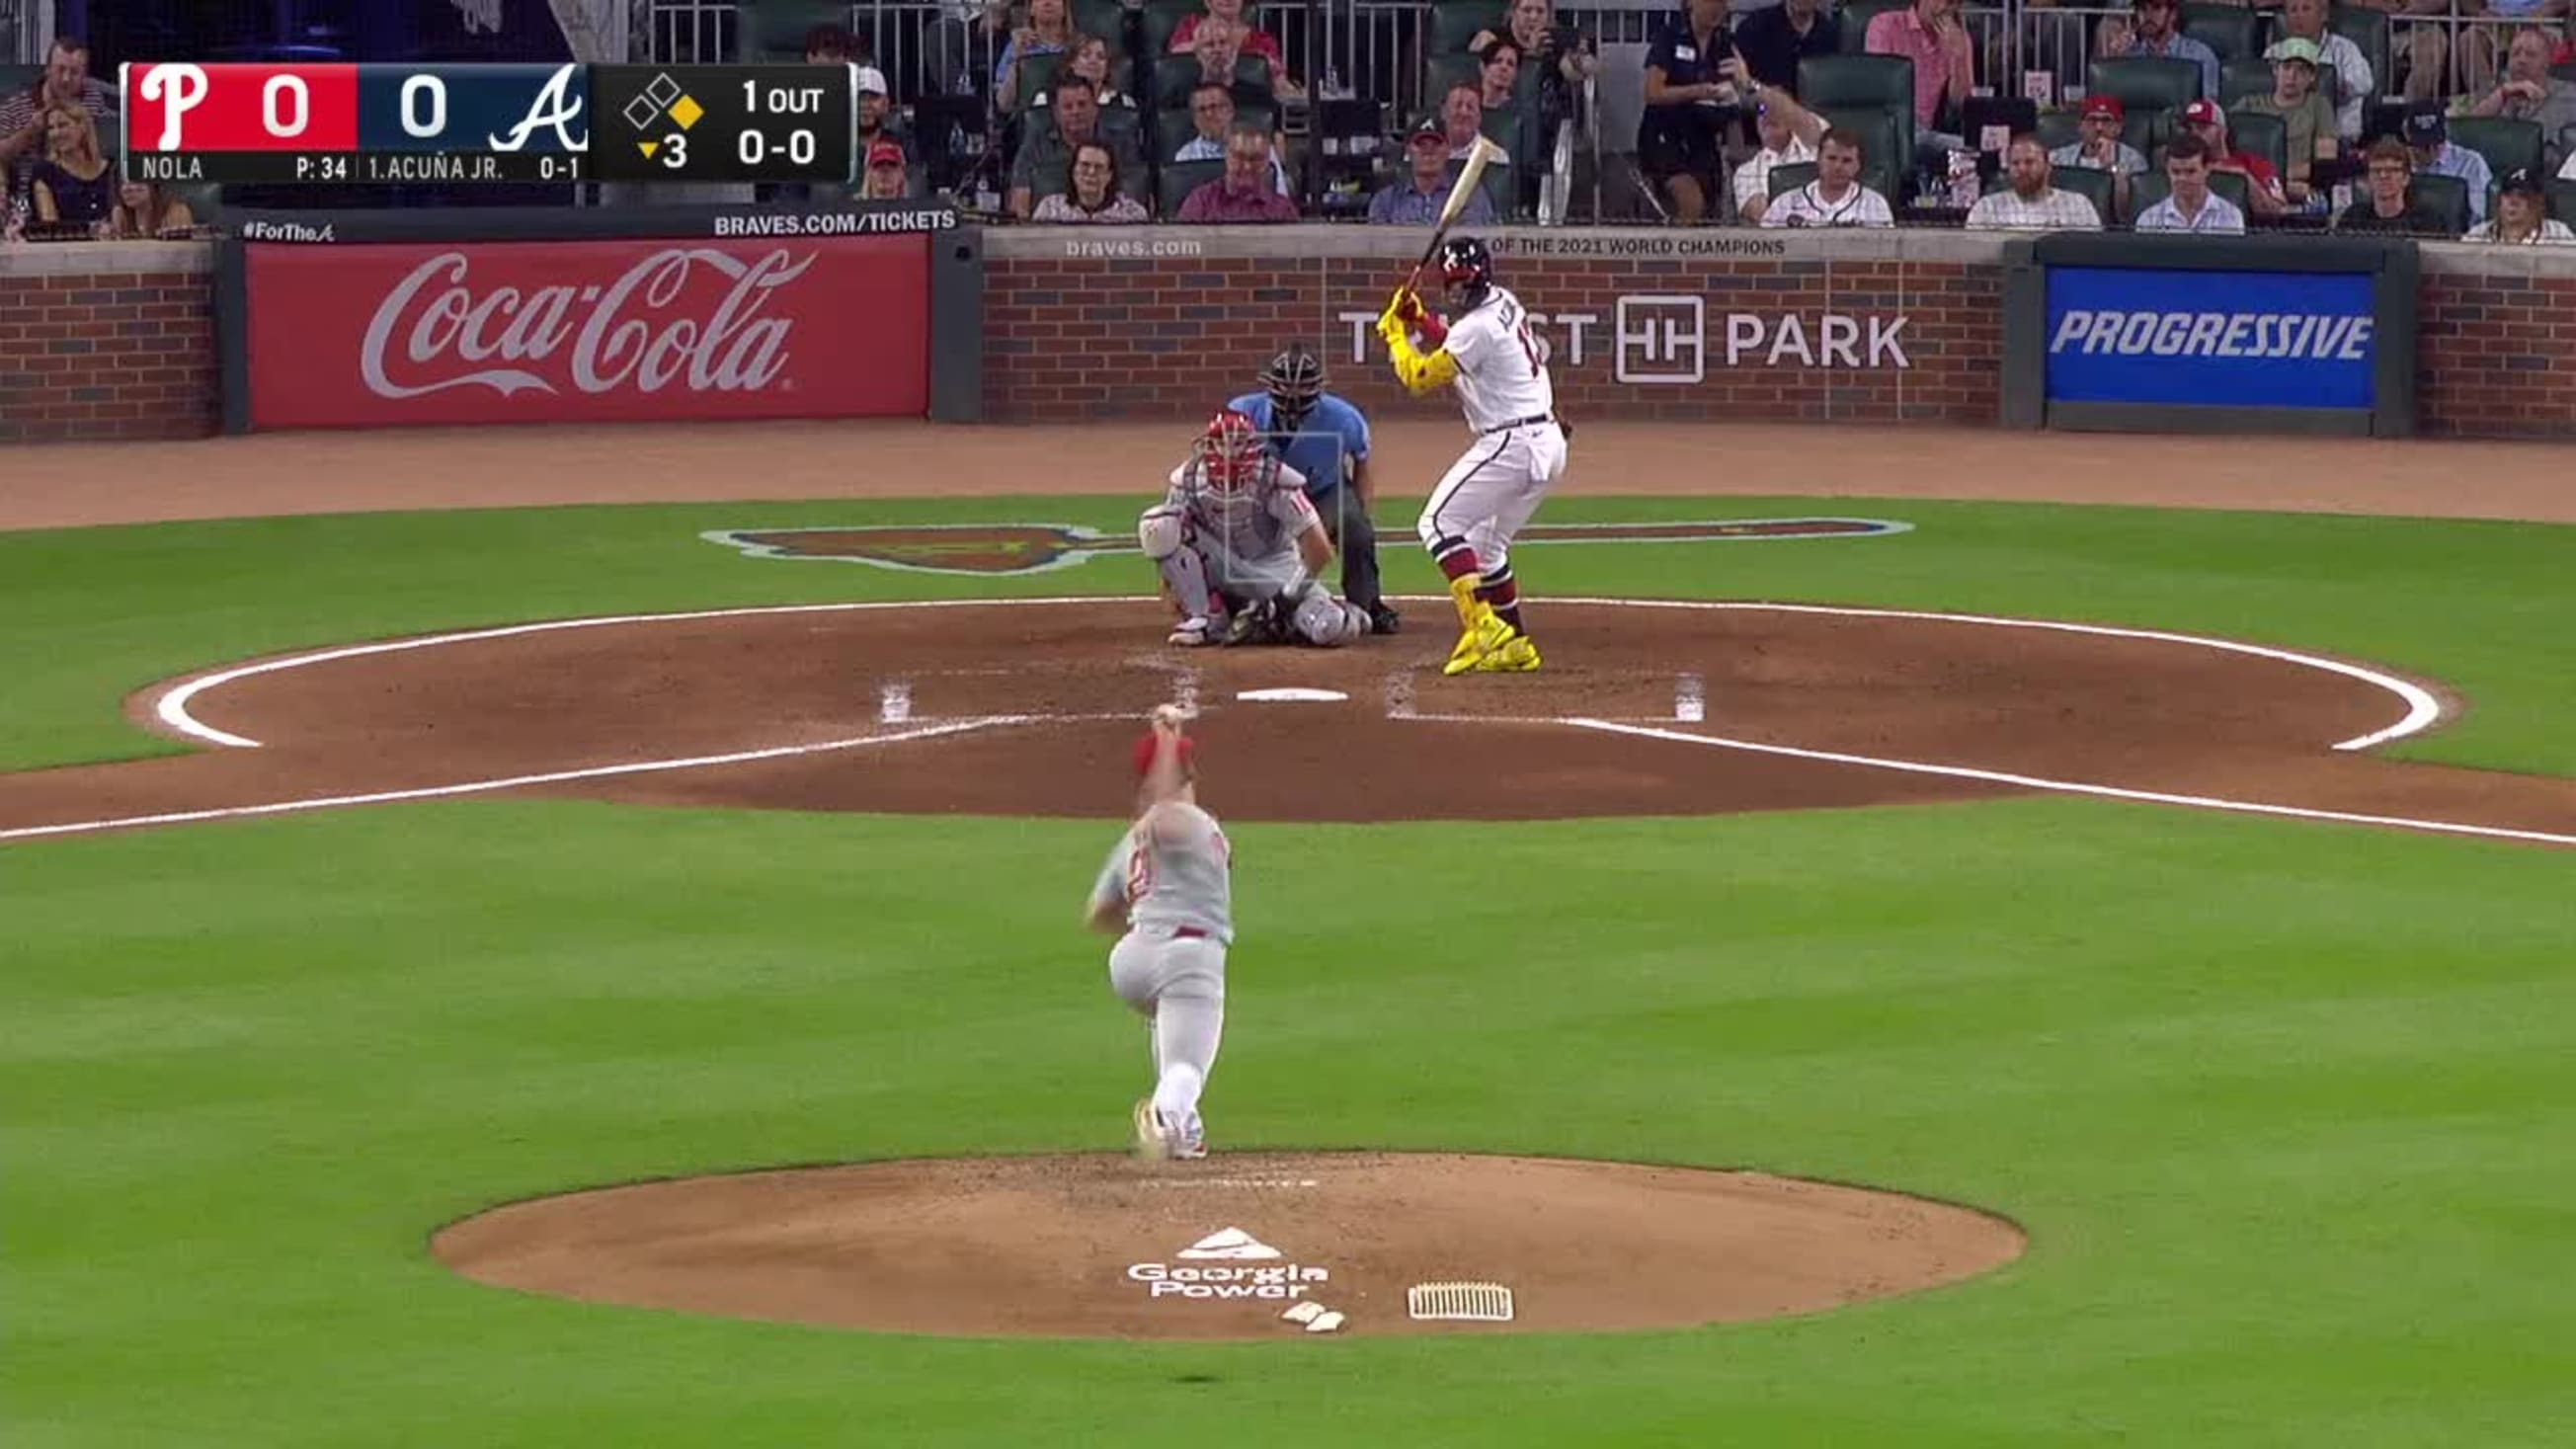 470 FEET! Ronald Acuña Jr. ABSOLUTELY DEMOLISHED this baseball! 